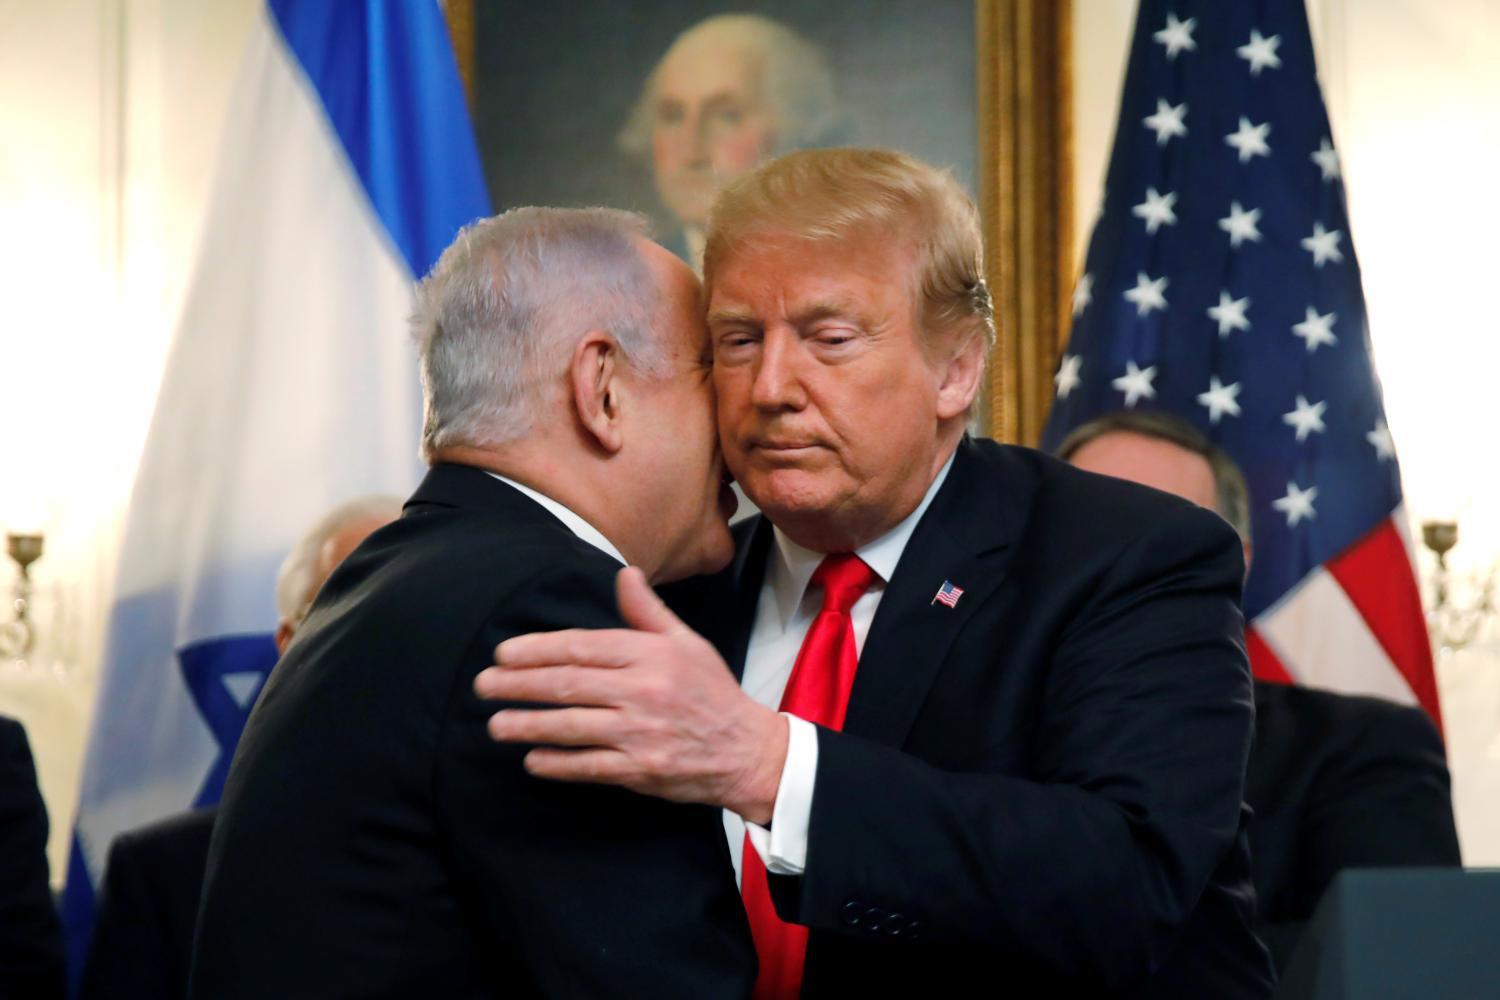 Israel's Prime Minister Benjamin Netanyahu hugs U.S. President Donald Trump as they talk during meetings at the White House in Washington, U.S., March 25, 2019. REUTERS/Carlos Barria - RC15FD644460